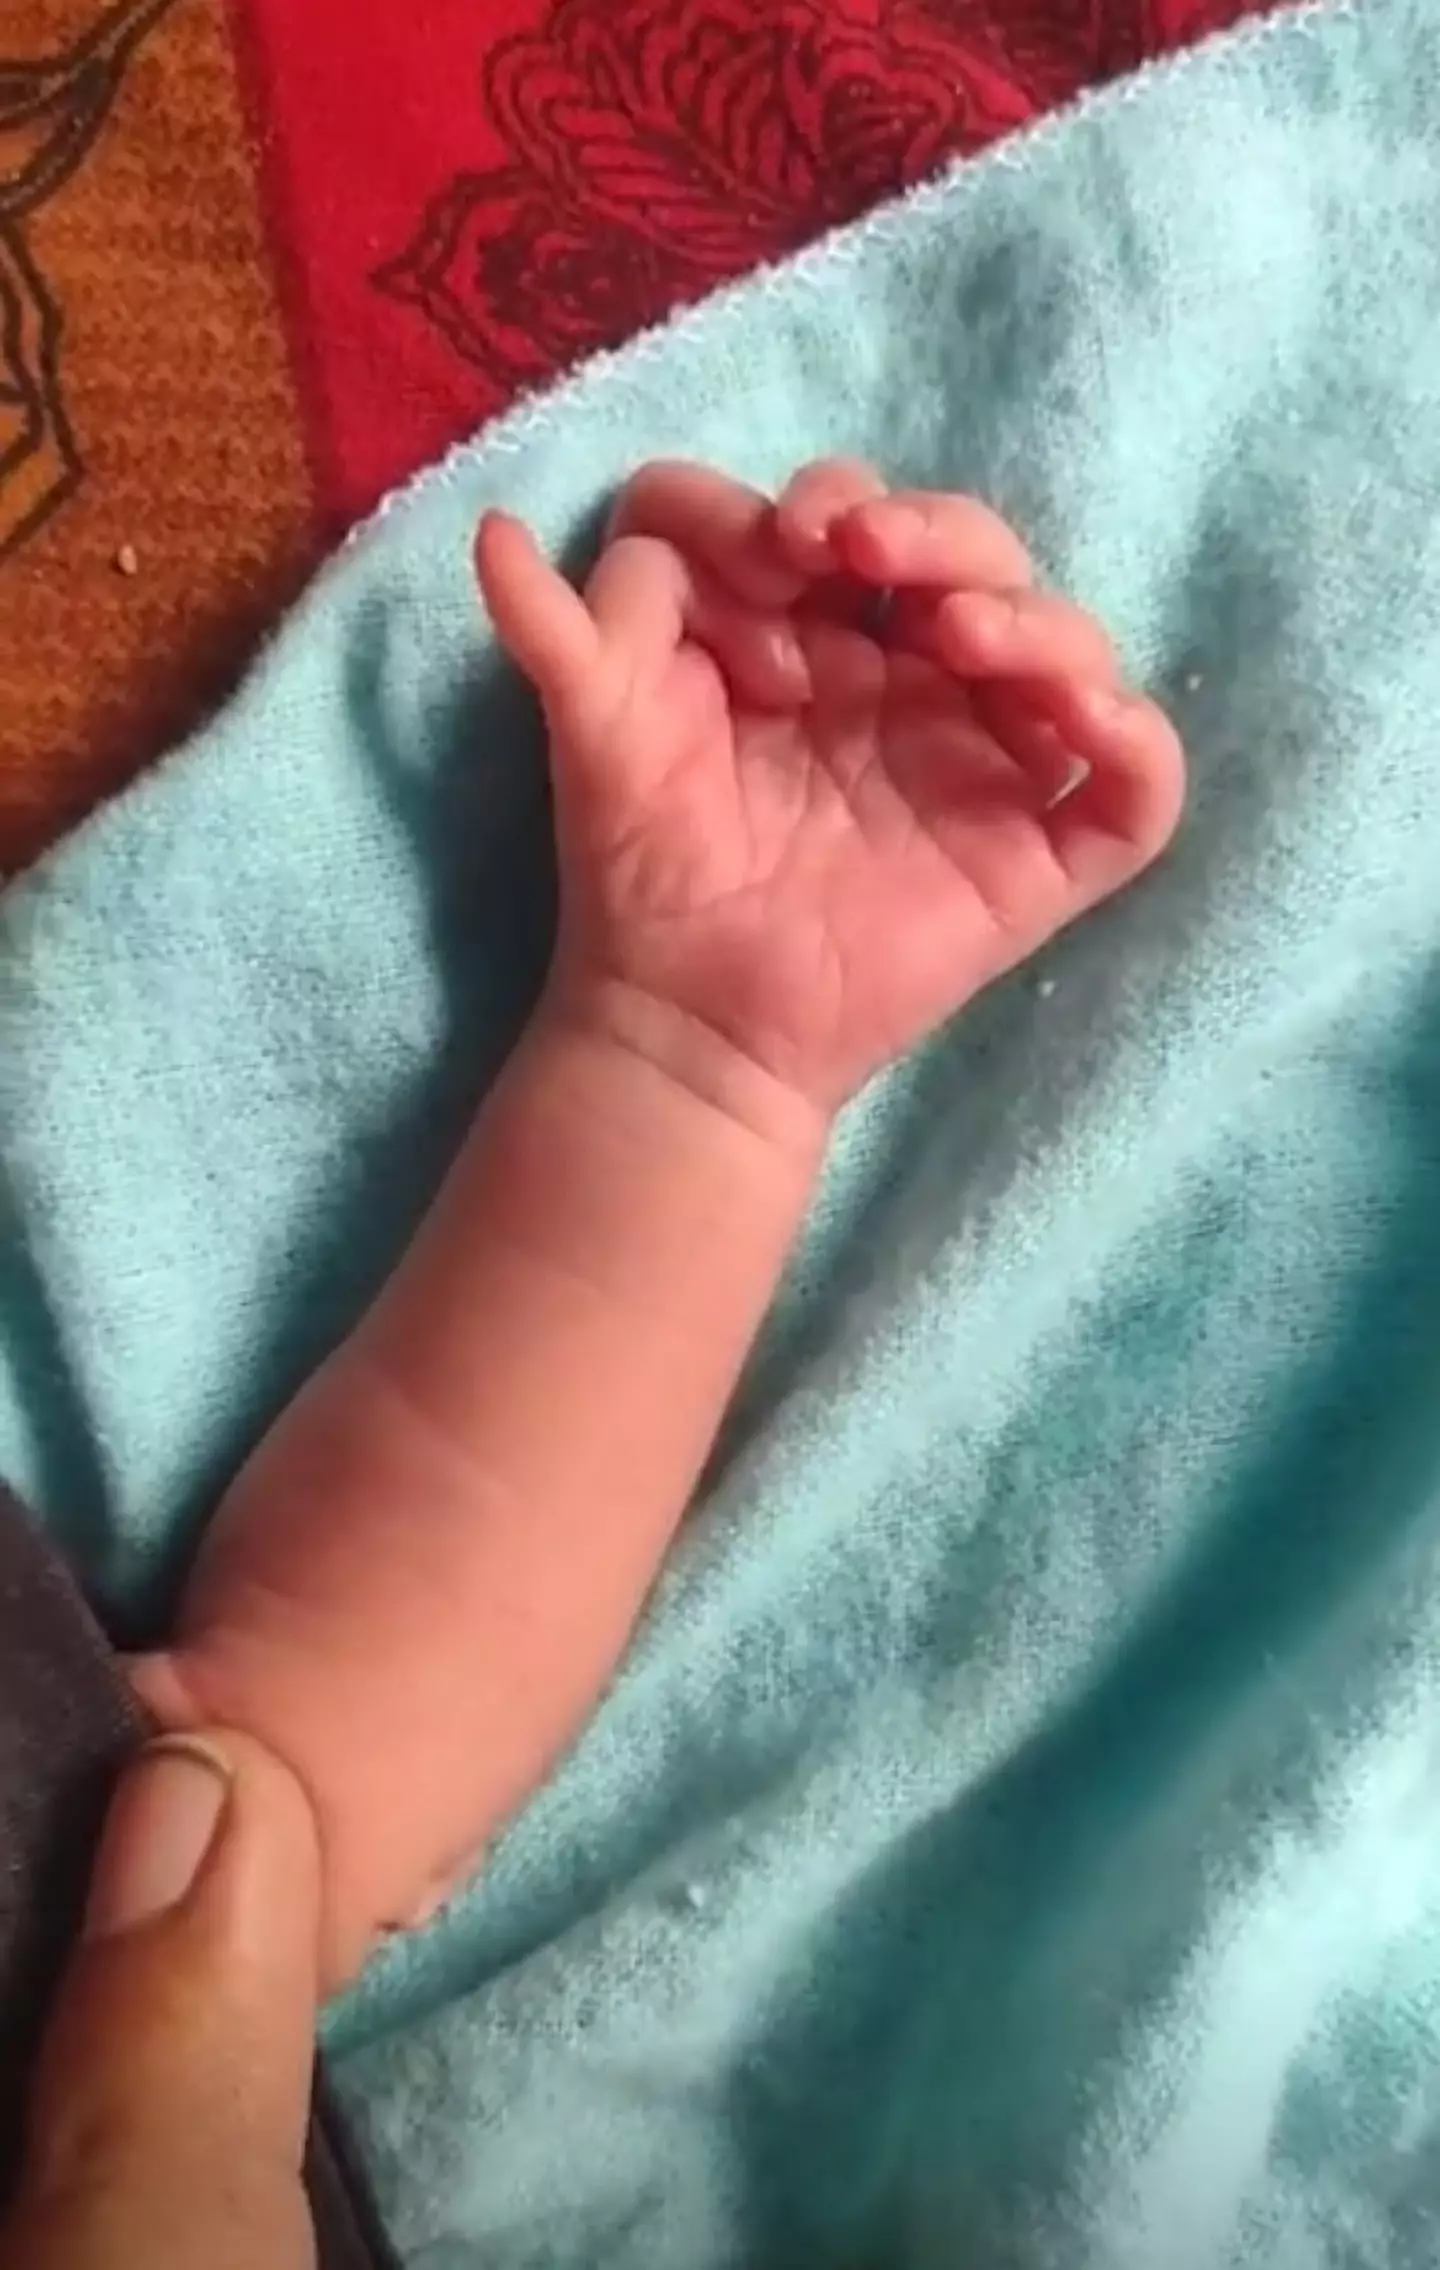 The baby girl has seven fingers on each hand.